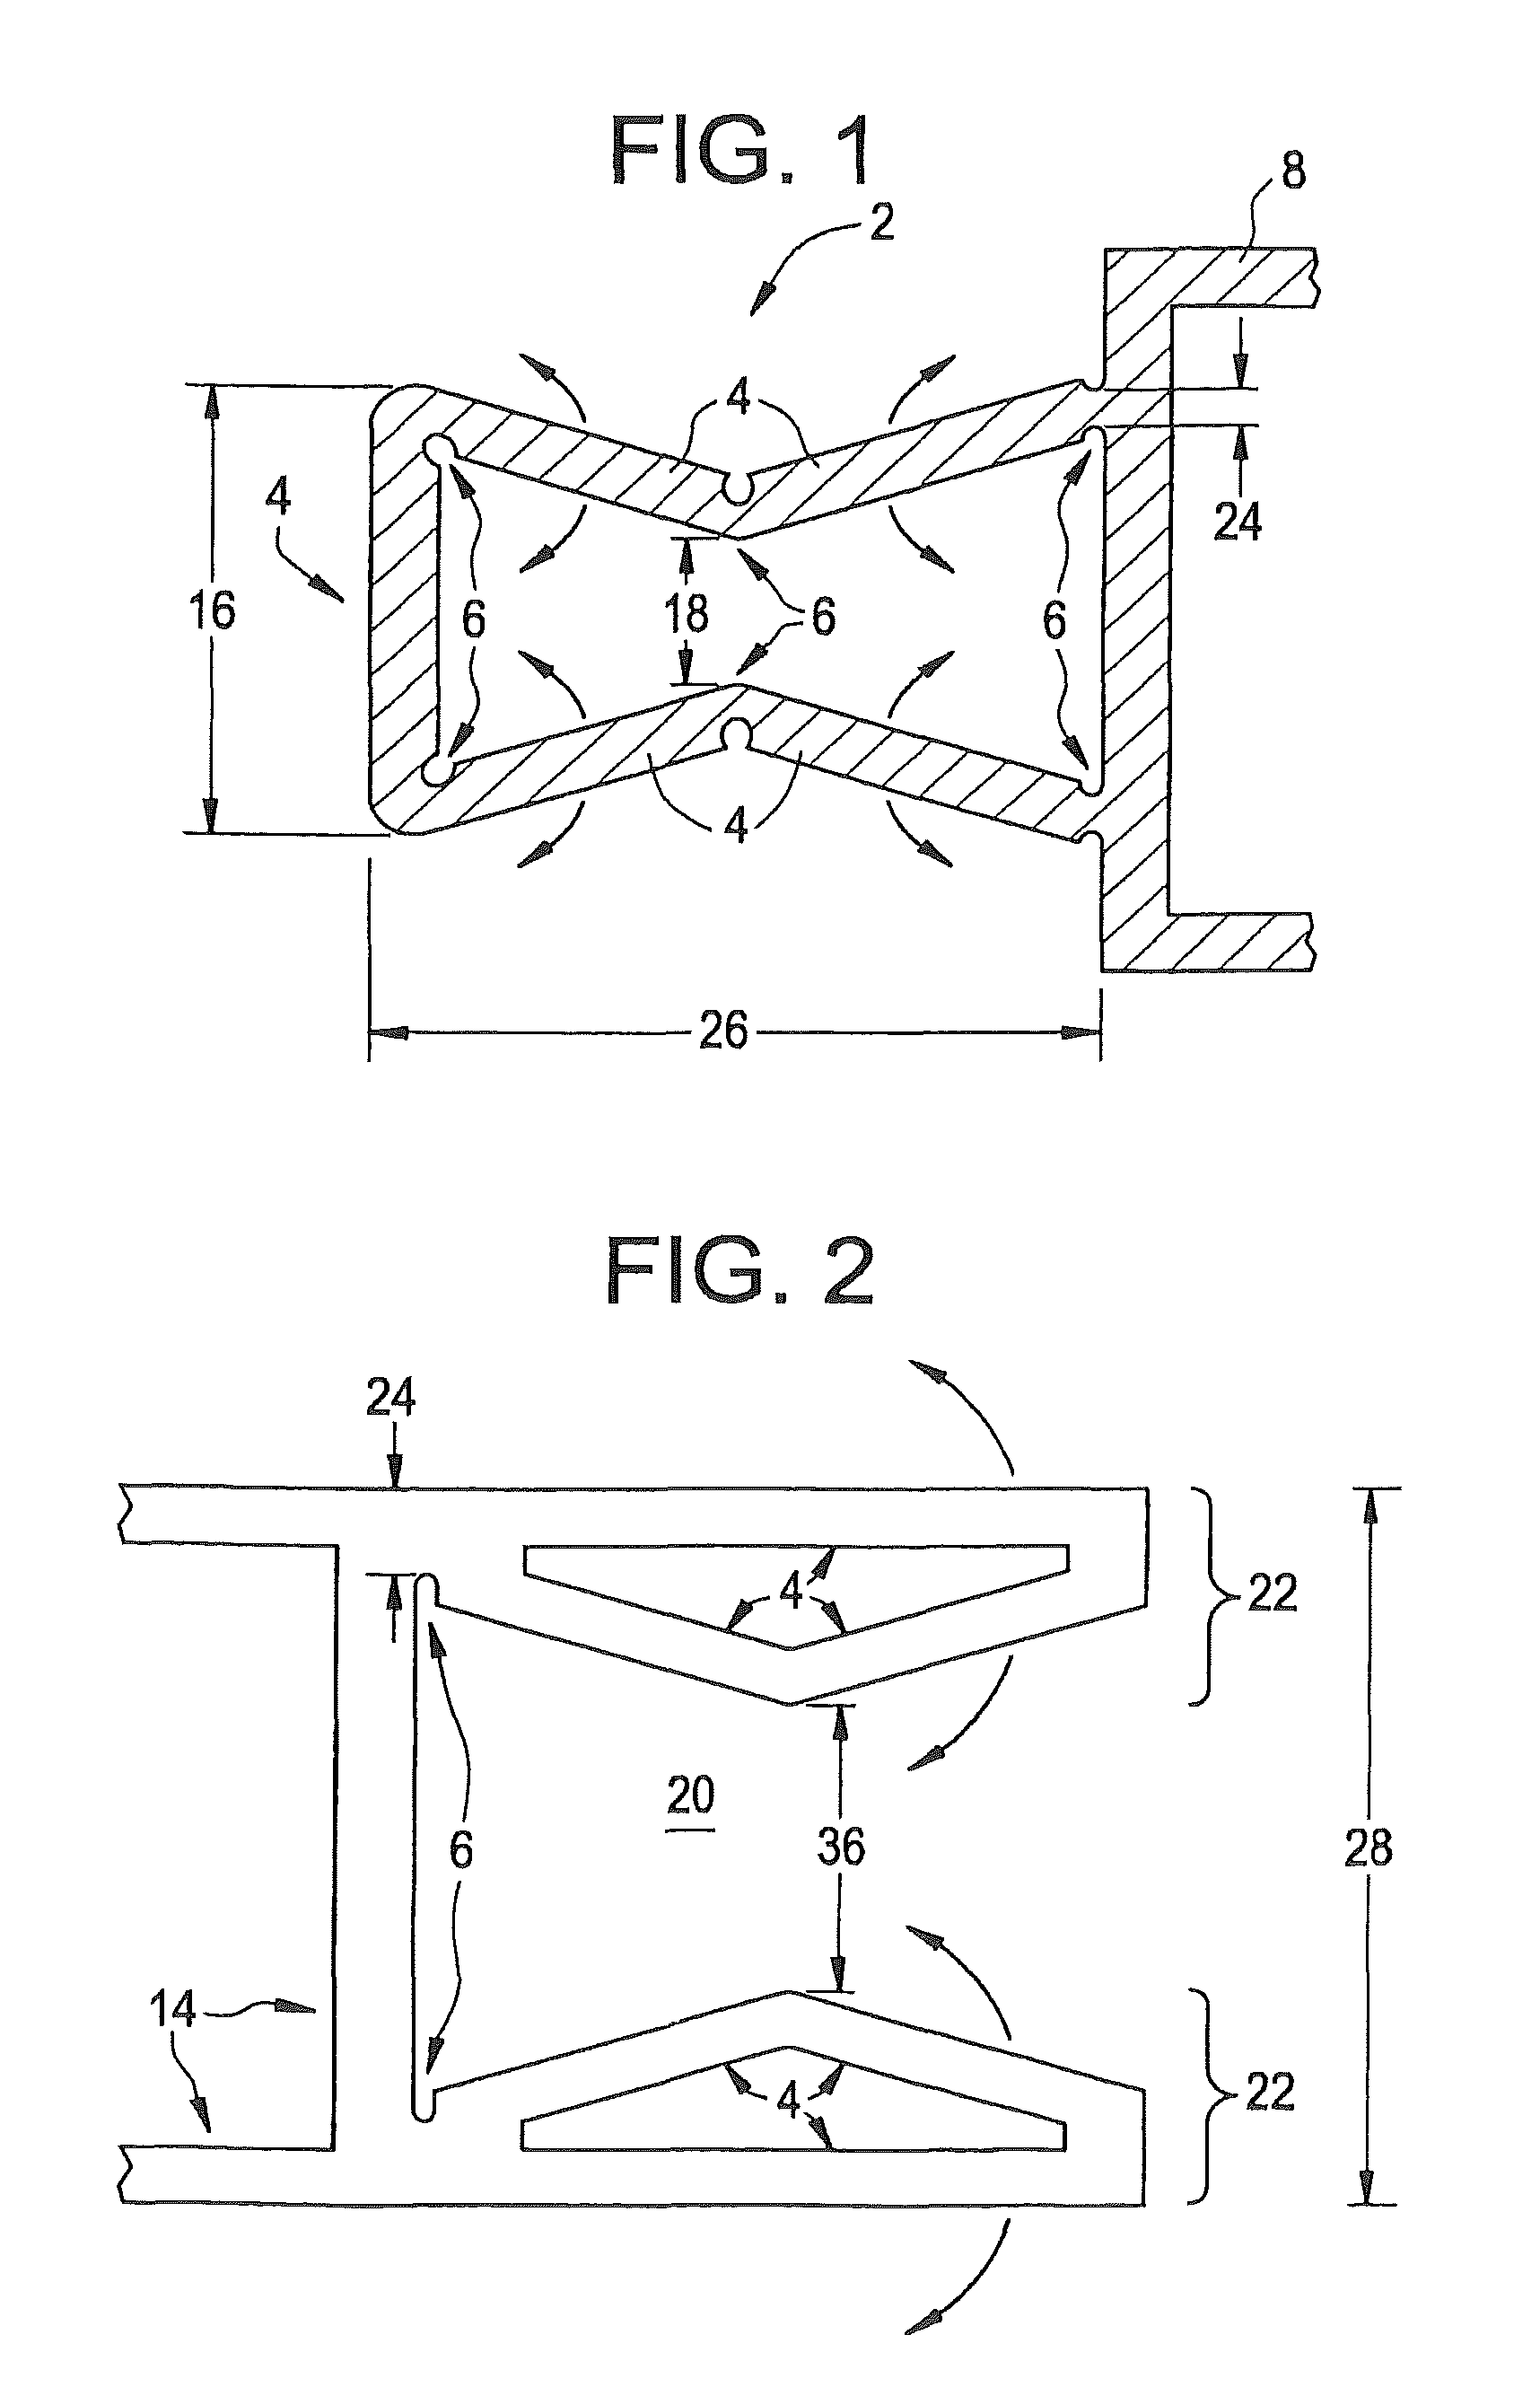 Apparatus for connecting panels